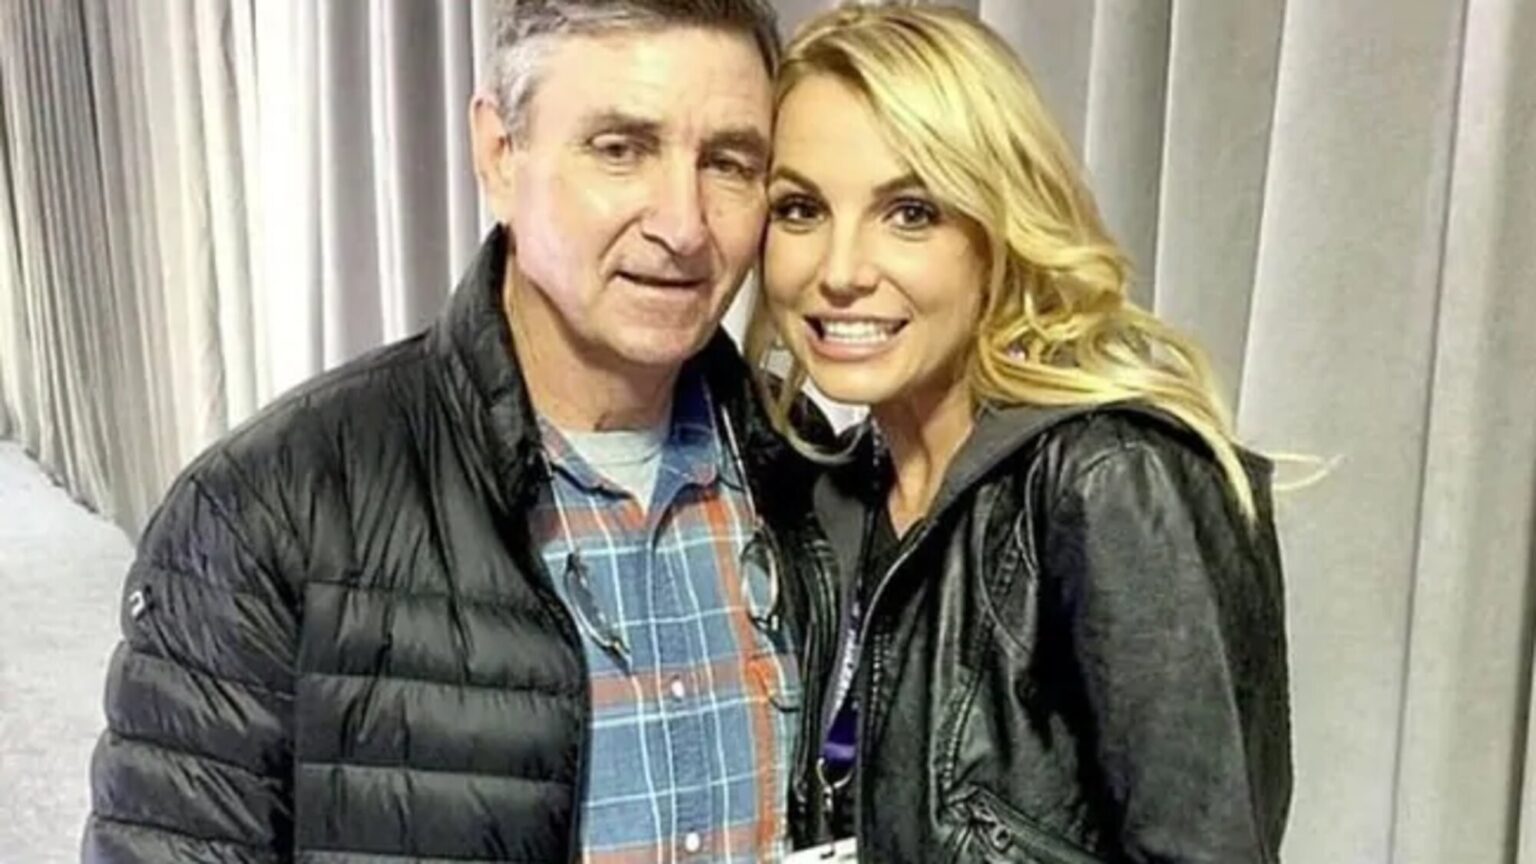 The #FreeBritney movement has been spreading since the release of the Britney Spears doc, but how does her father feel? Read what he had to say here.